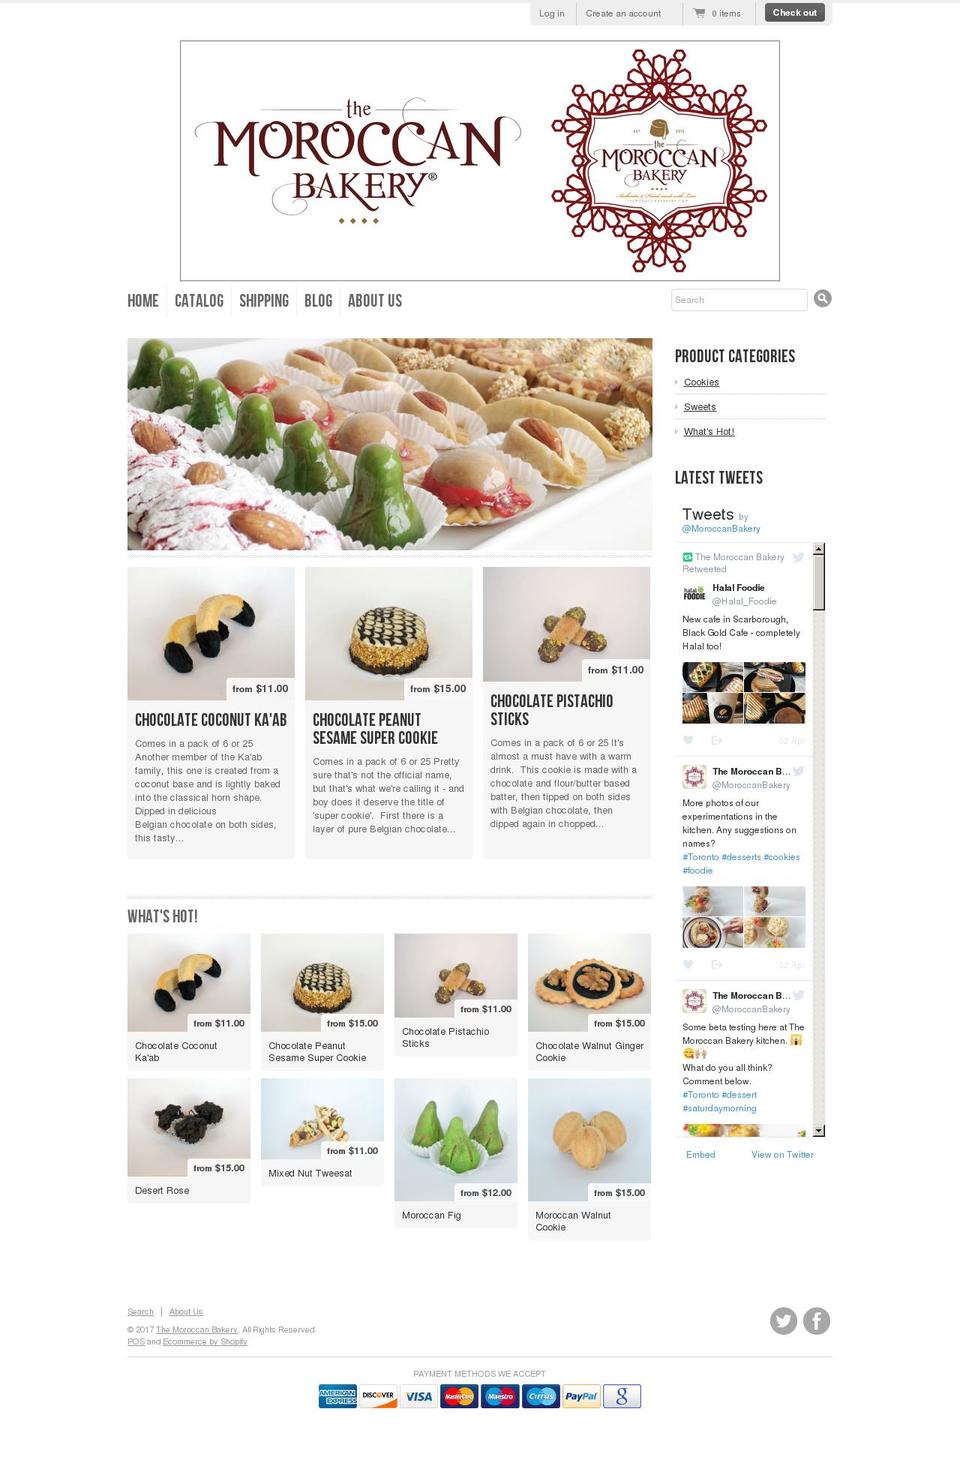 Radiance Shopify theme site example themoroccanbakery.com